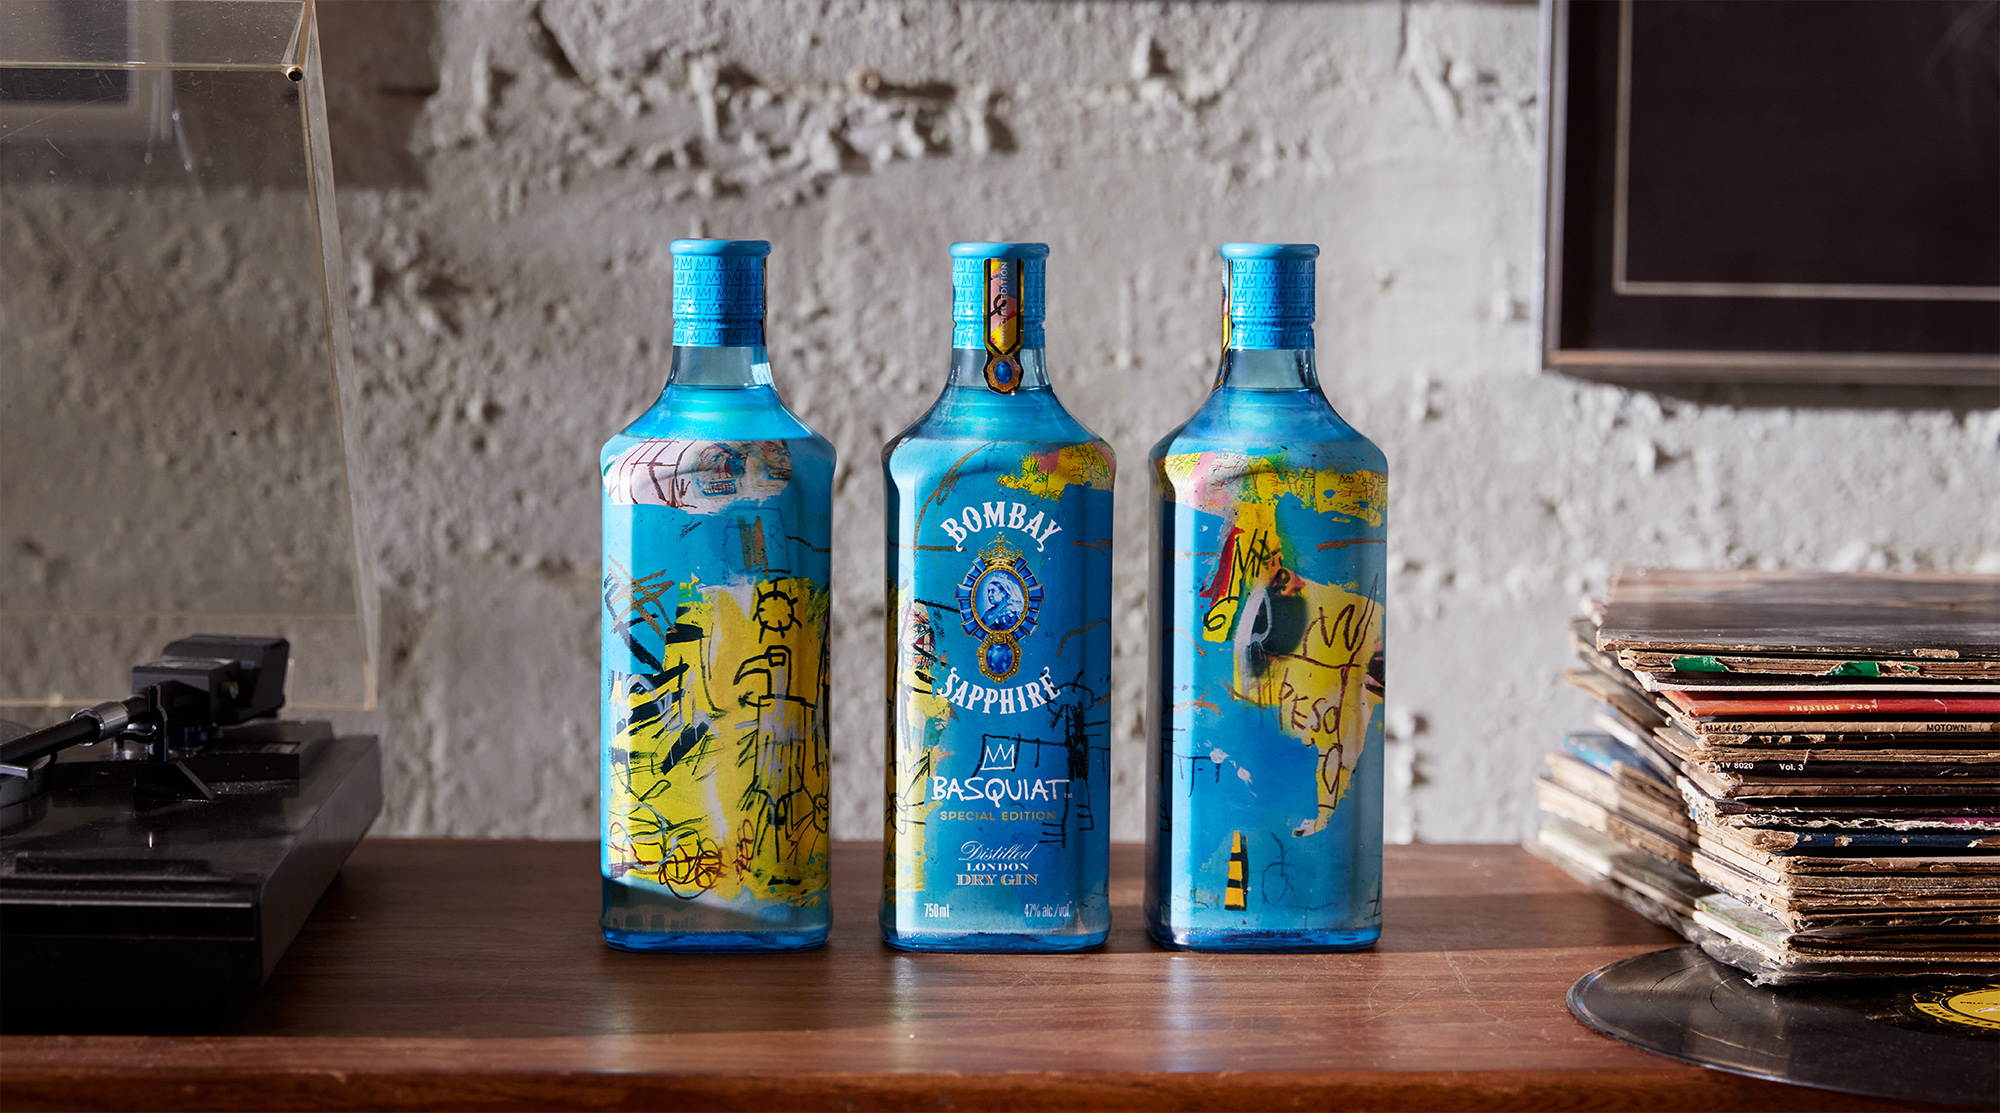 Bombay Sapphire Honours Jean-michel Basquiat With Special Edition Designed by Knockout